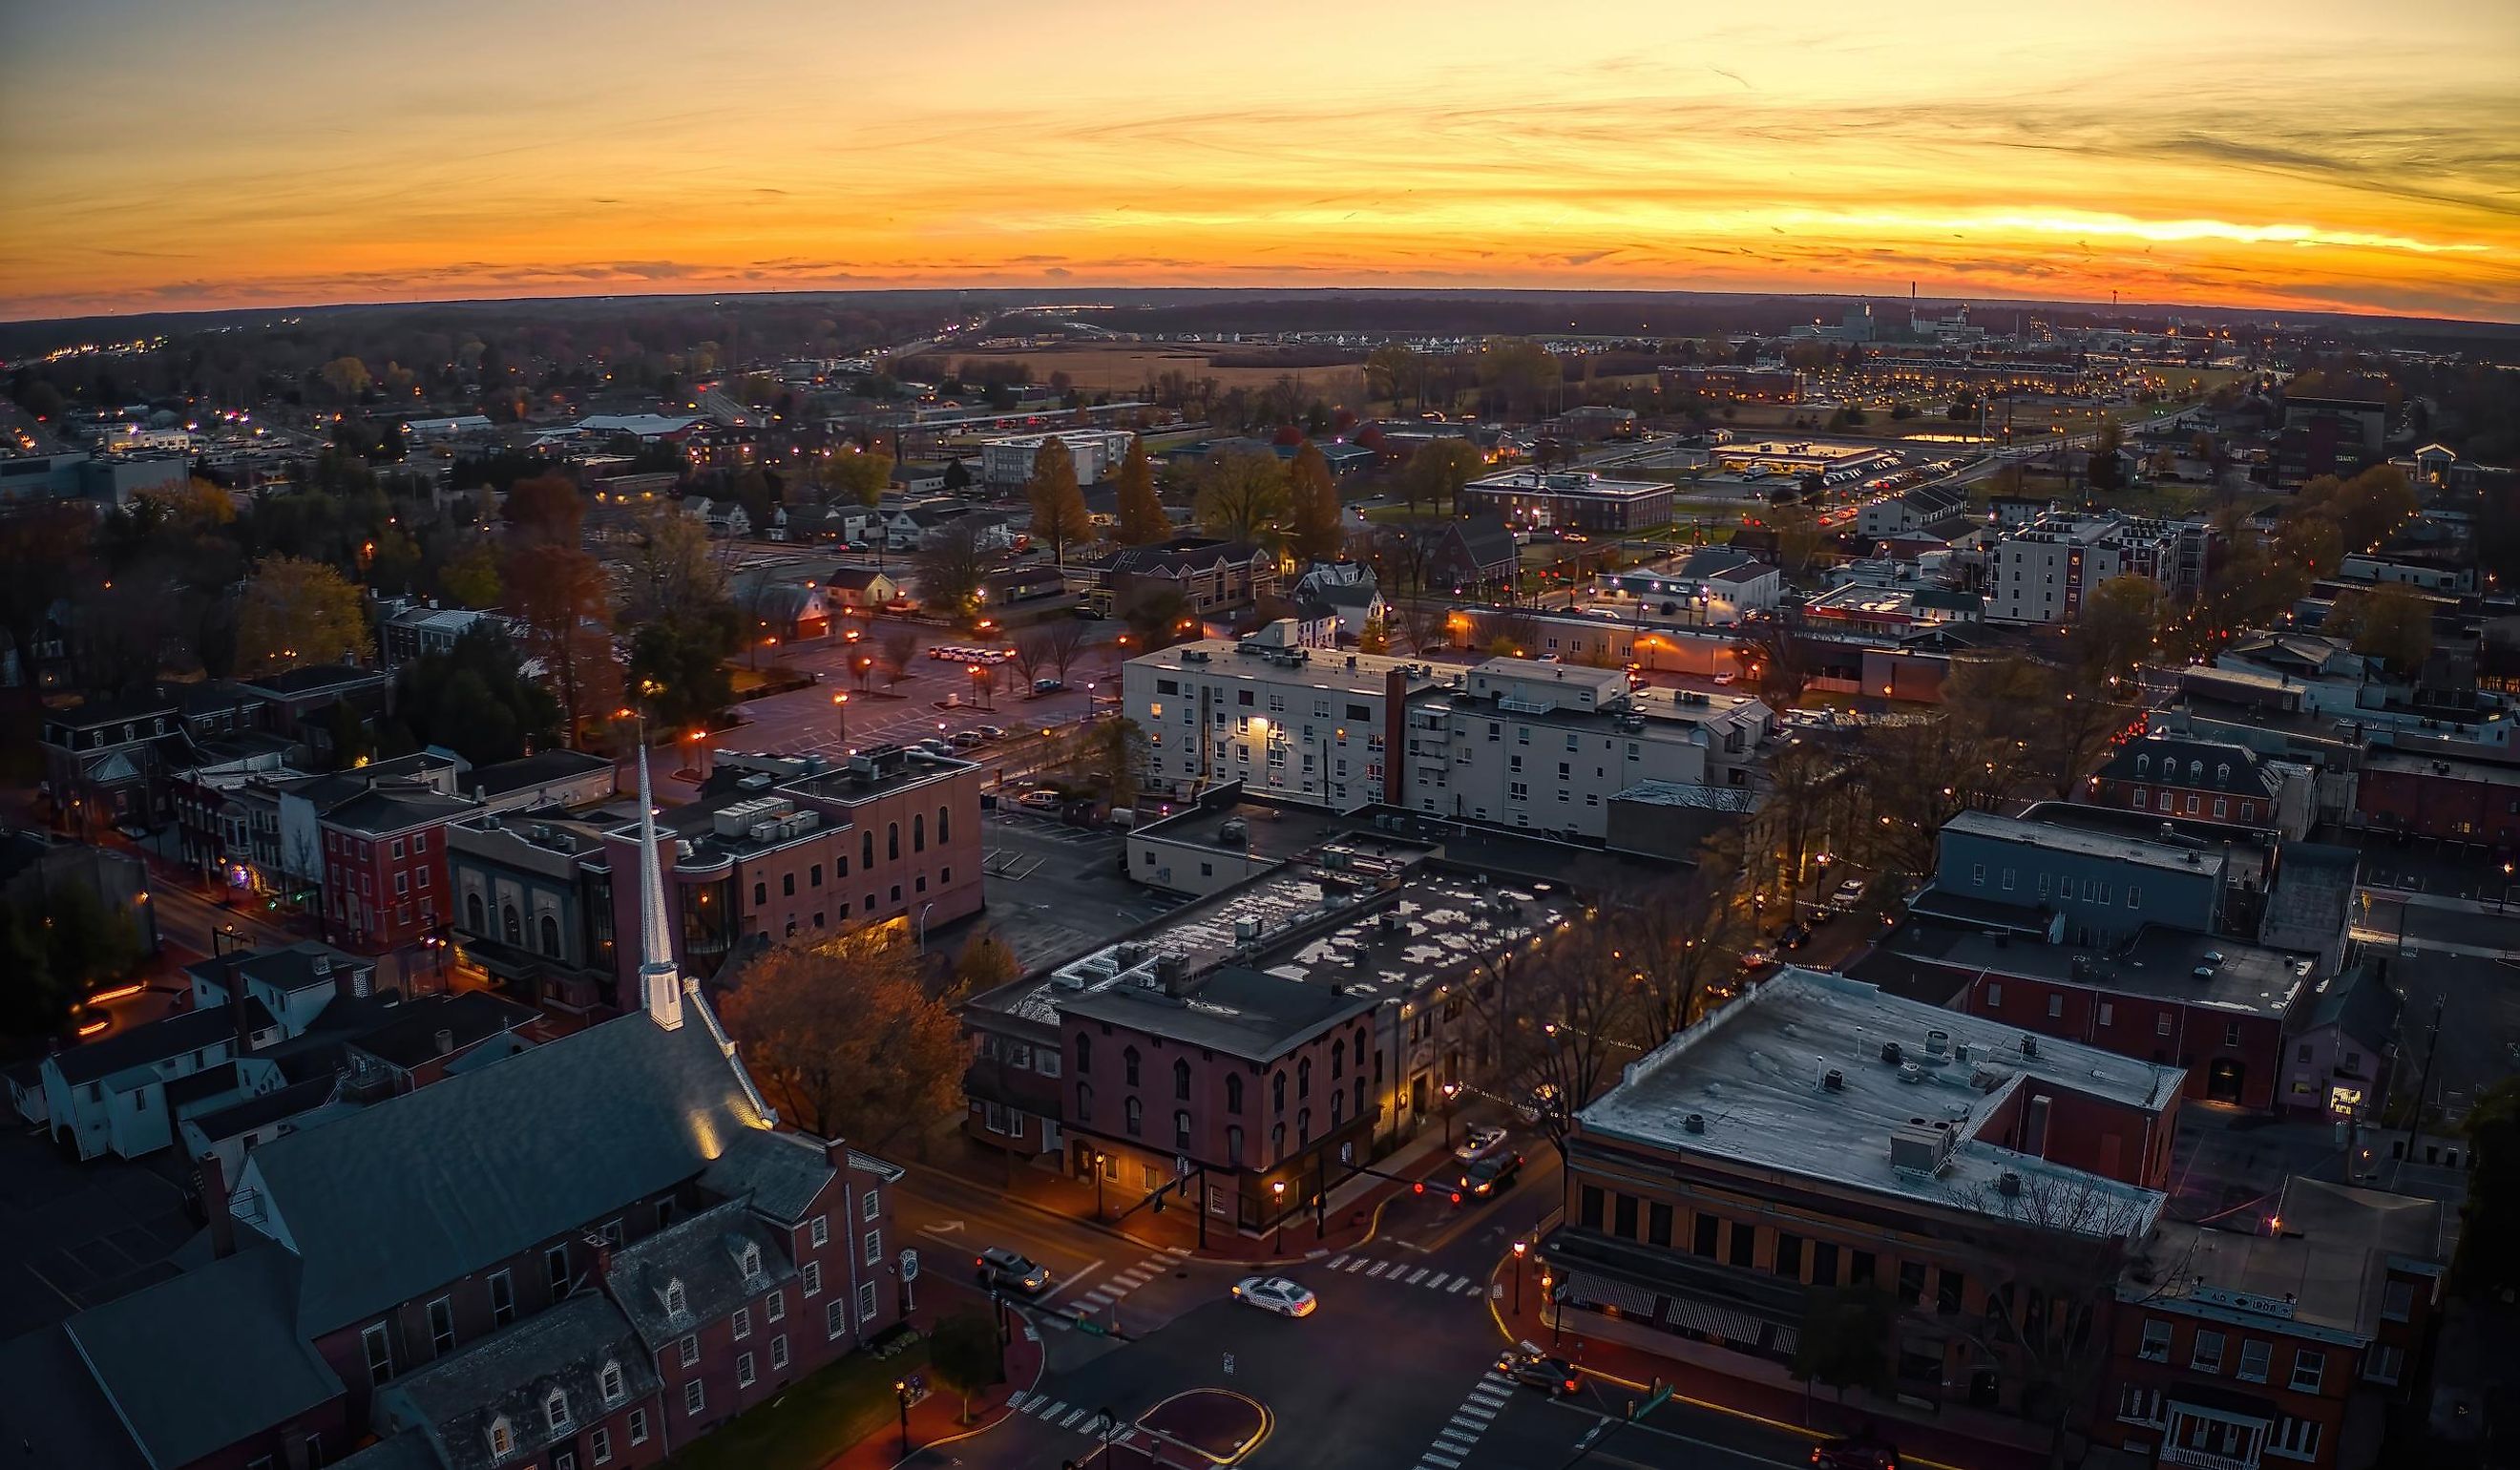 Aerial View of Dover, Delaware during Autumn at Dusk